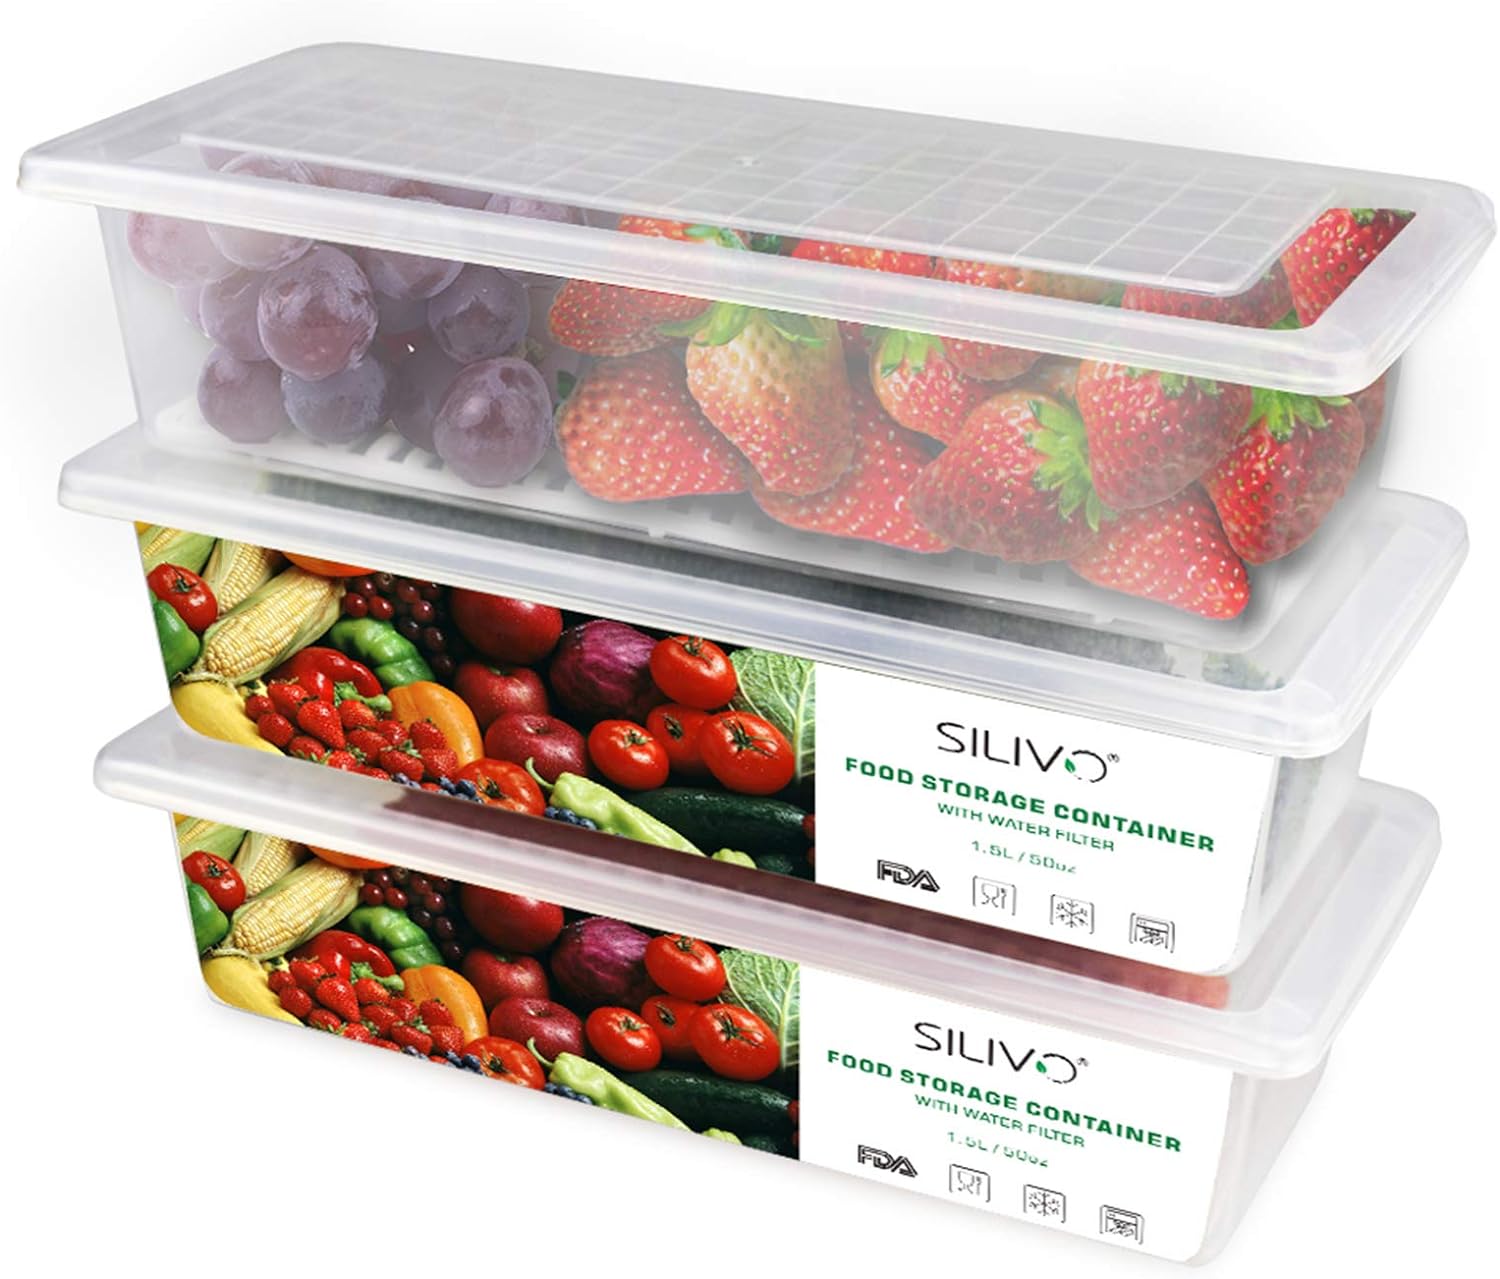 SILIVO Fruit Storage Containers for Fridge (3 Pack) - 1.5L Produce Saver Containers for Refrigerator with Removable Drain Tray Keep Fresh for Produce, Bacon, Fruits and Vegetables